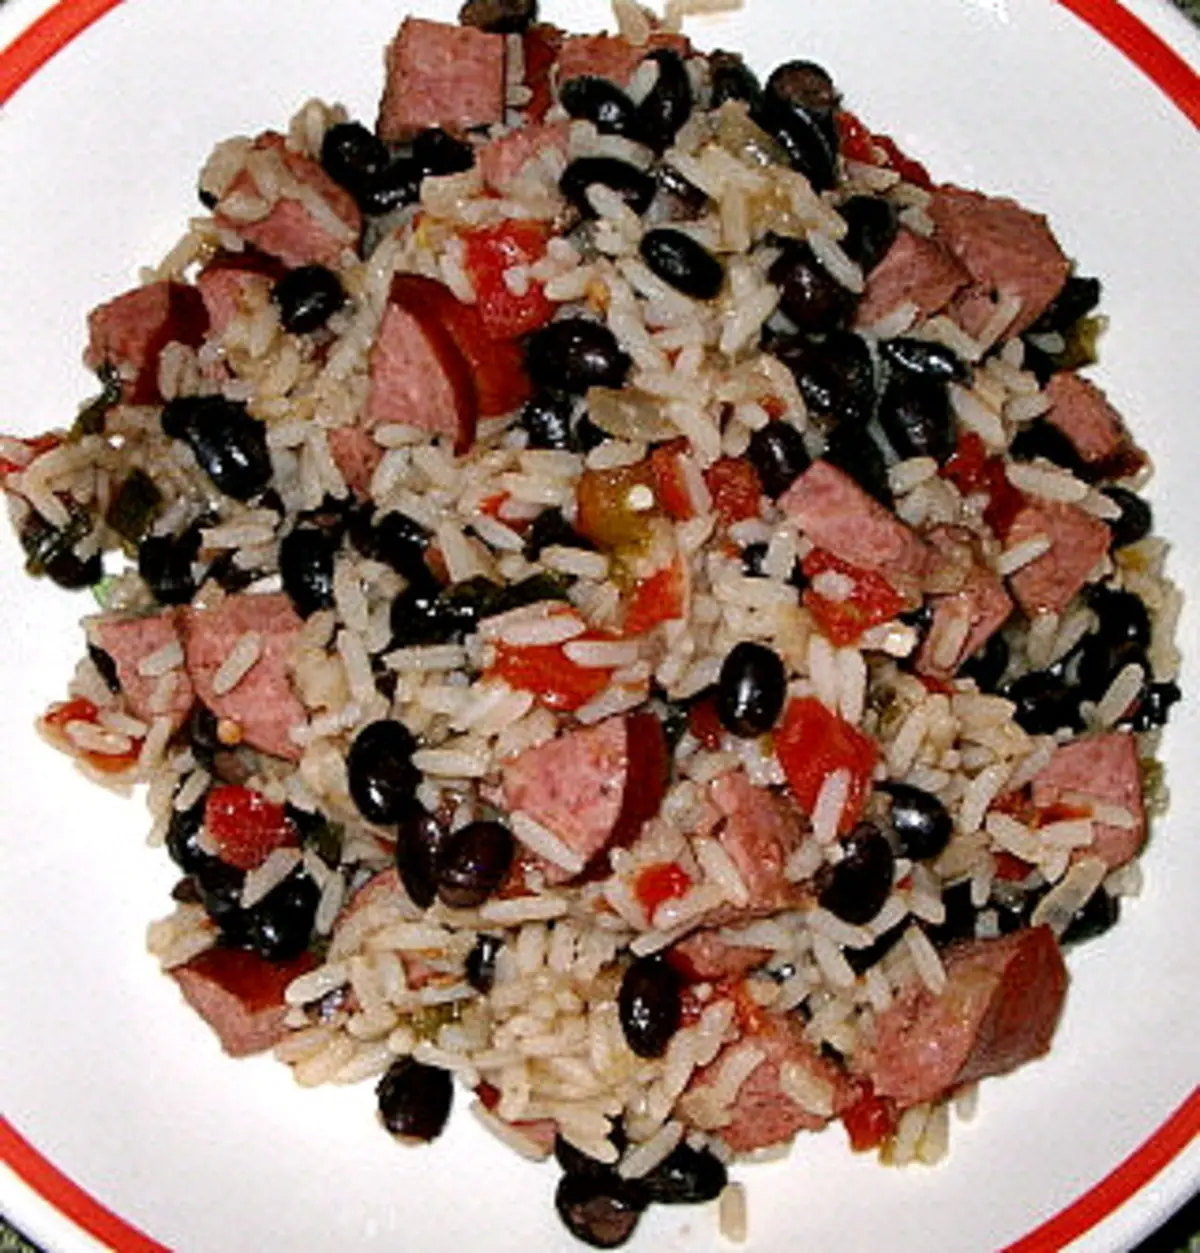 smoked sausage and black beans recipe - How do you dress up black beans from a can